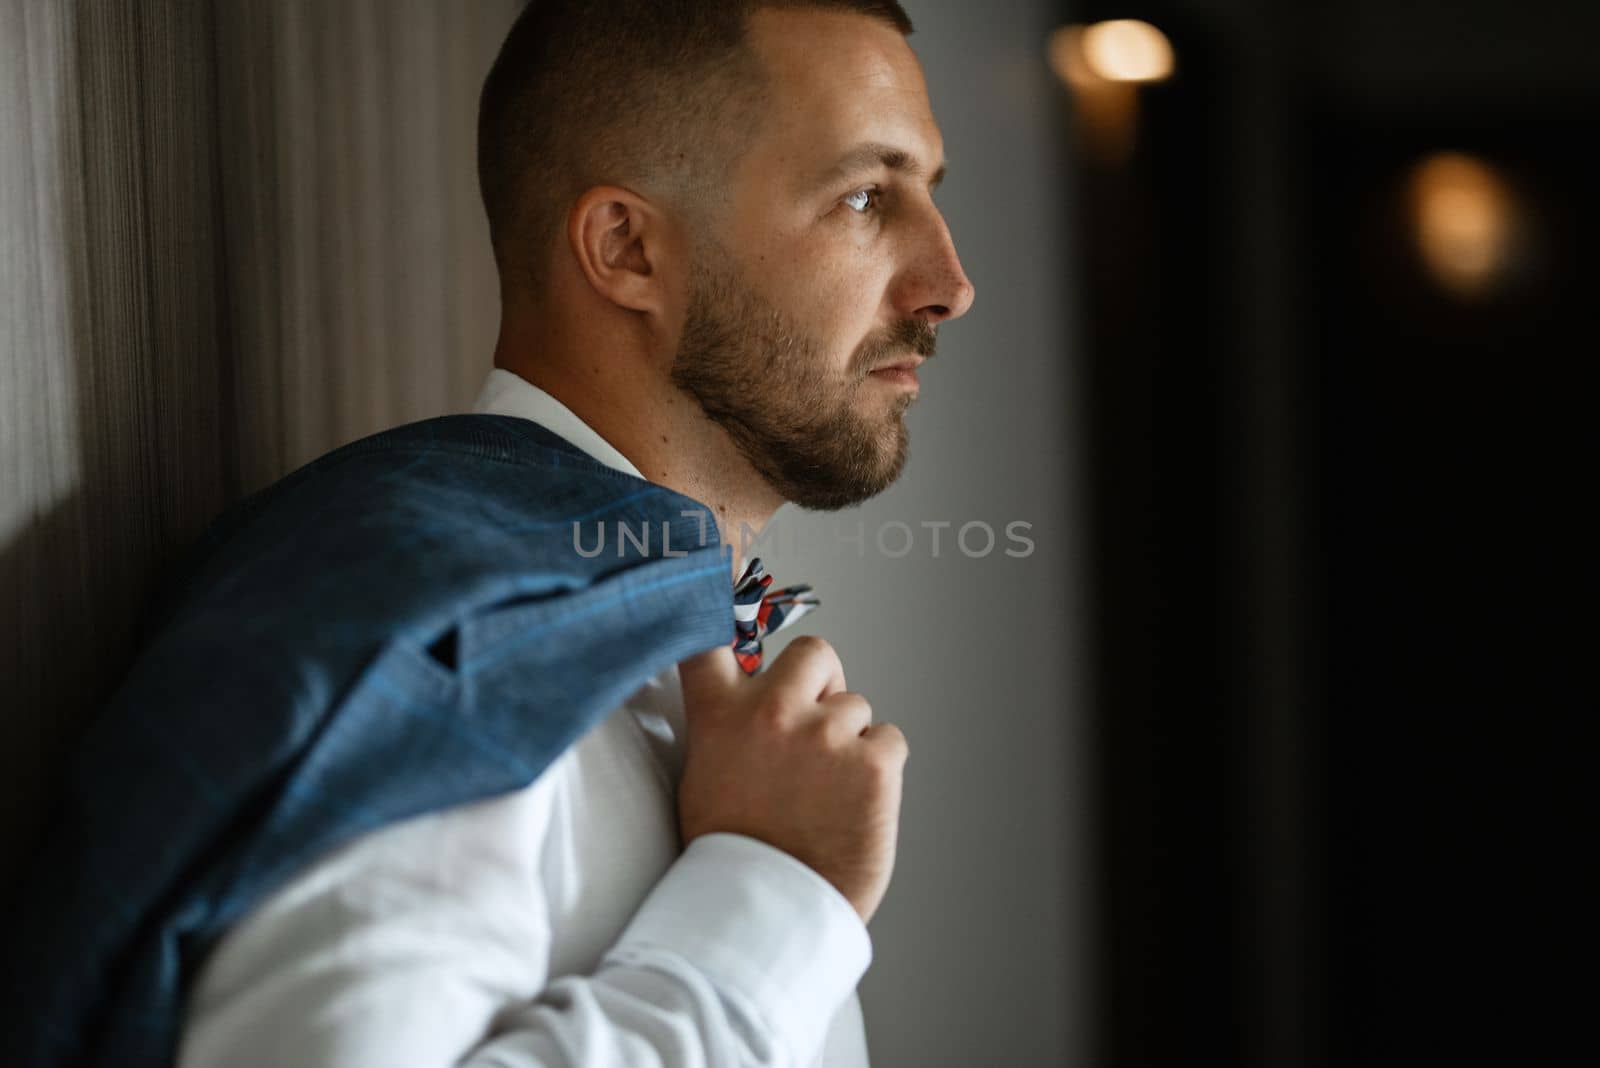 portrait of smiling groom with beard in blue color suit